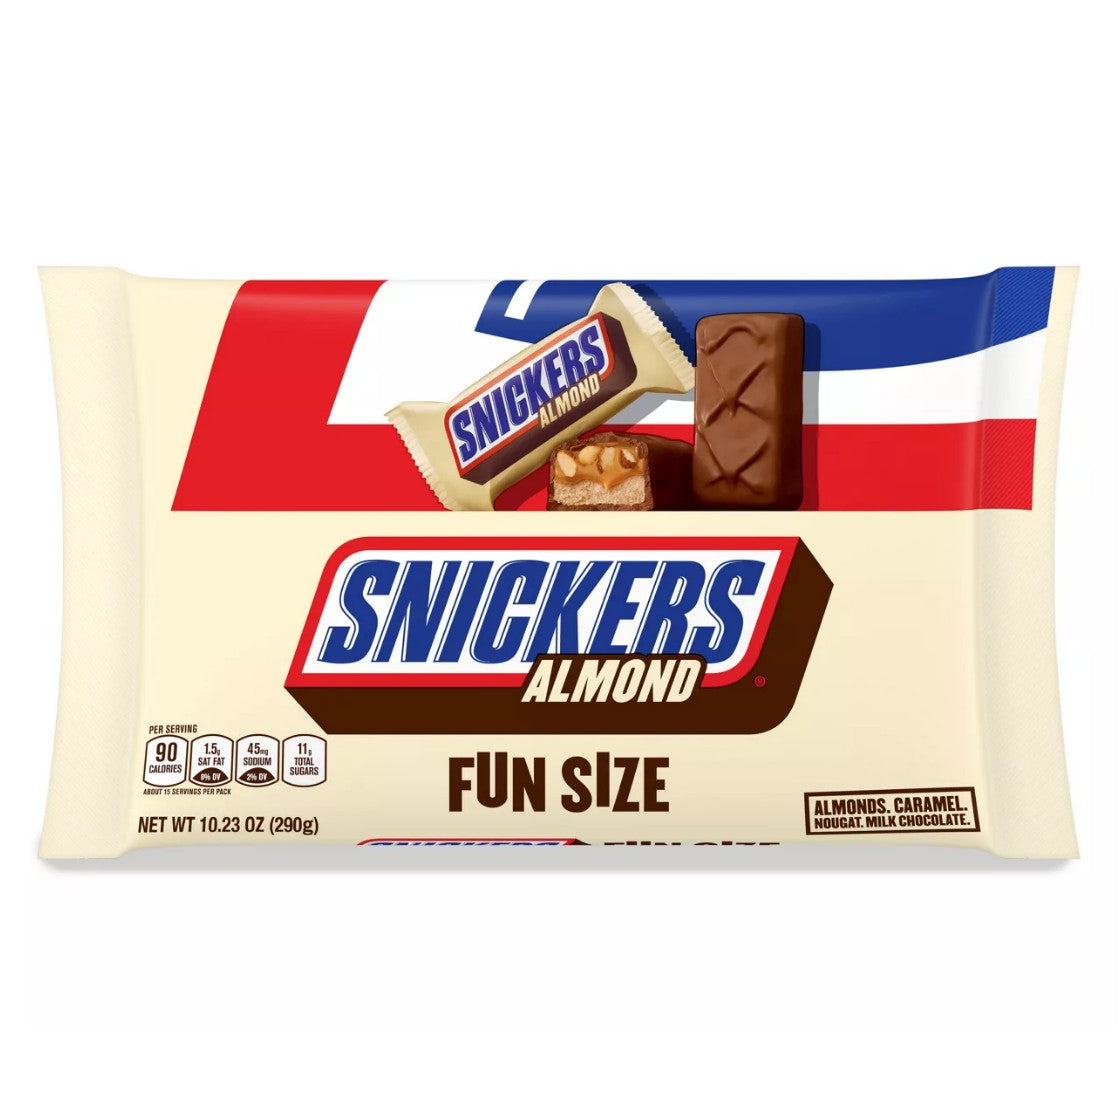 All City Candy Snickers Almond Fun Size Candy Bars - 10.23-oz. Bag Candy Bars Mars Chocolate For fresh candy and great service, visit www.allcitycandy.com